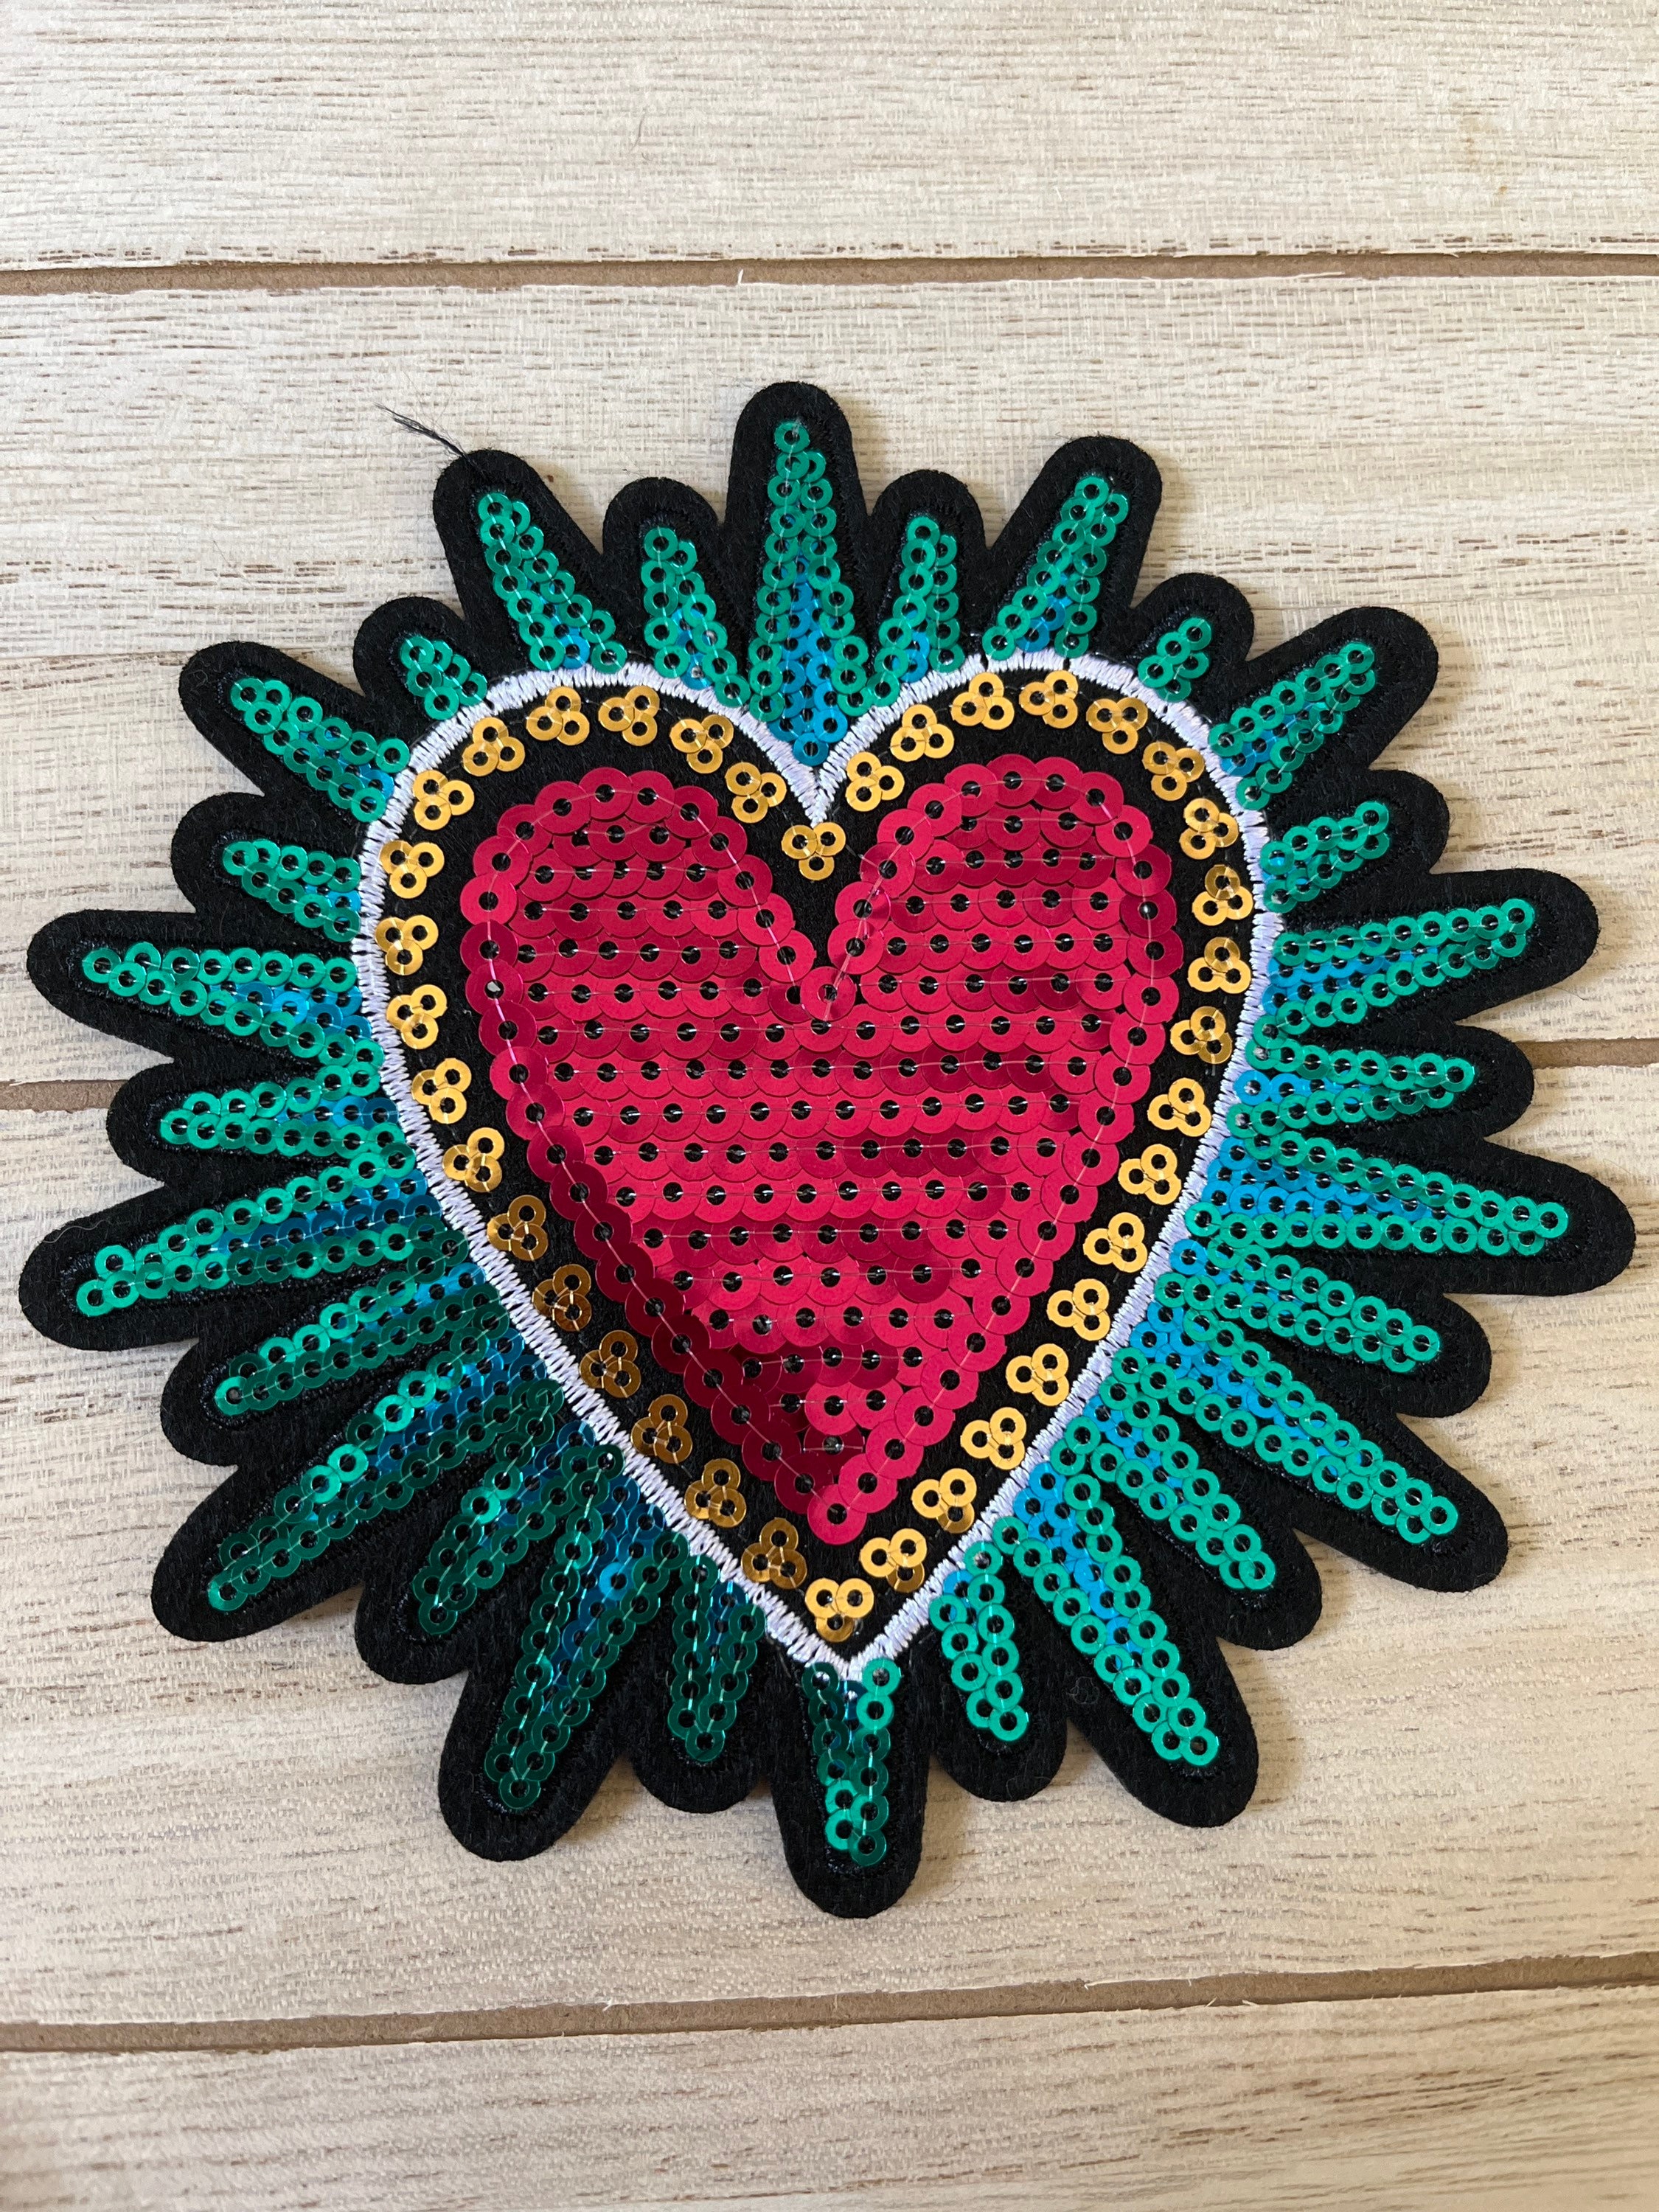 RED HEART PATCH iron-on embroidered Valentine's Day Love Romance Emoji  Romantic Applique